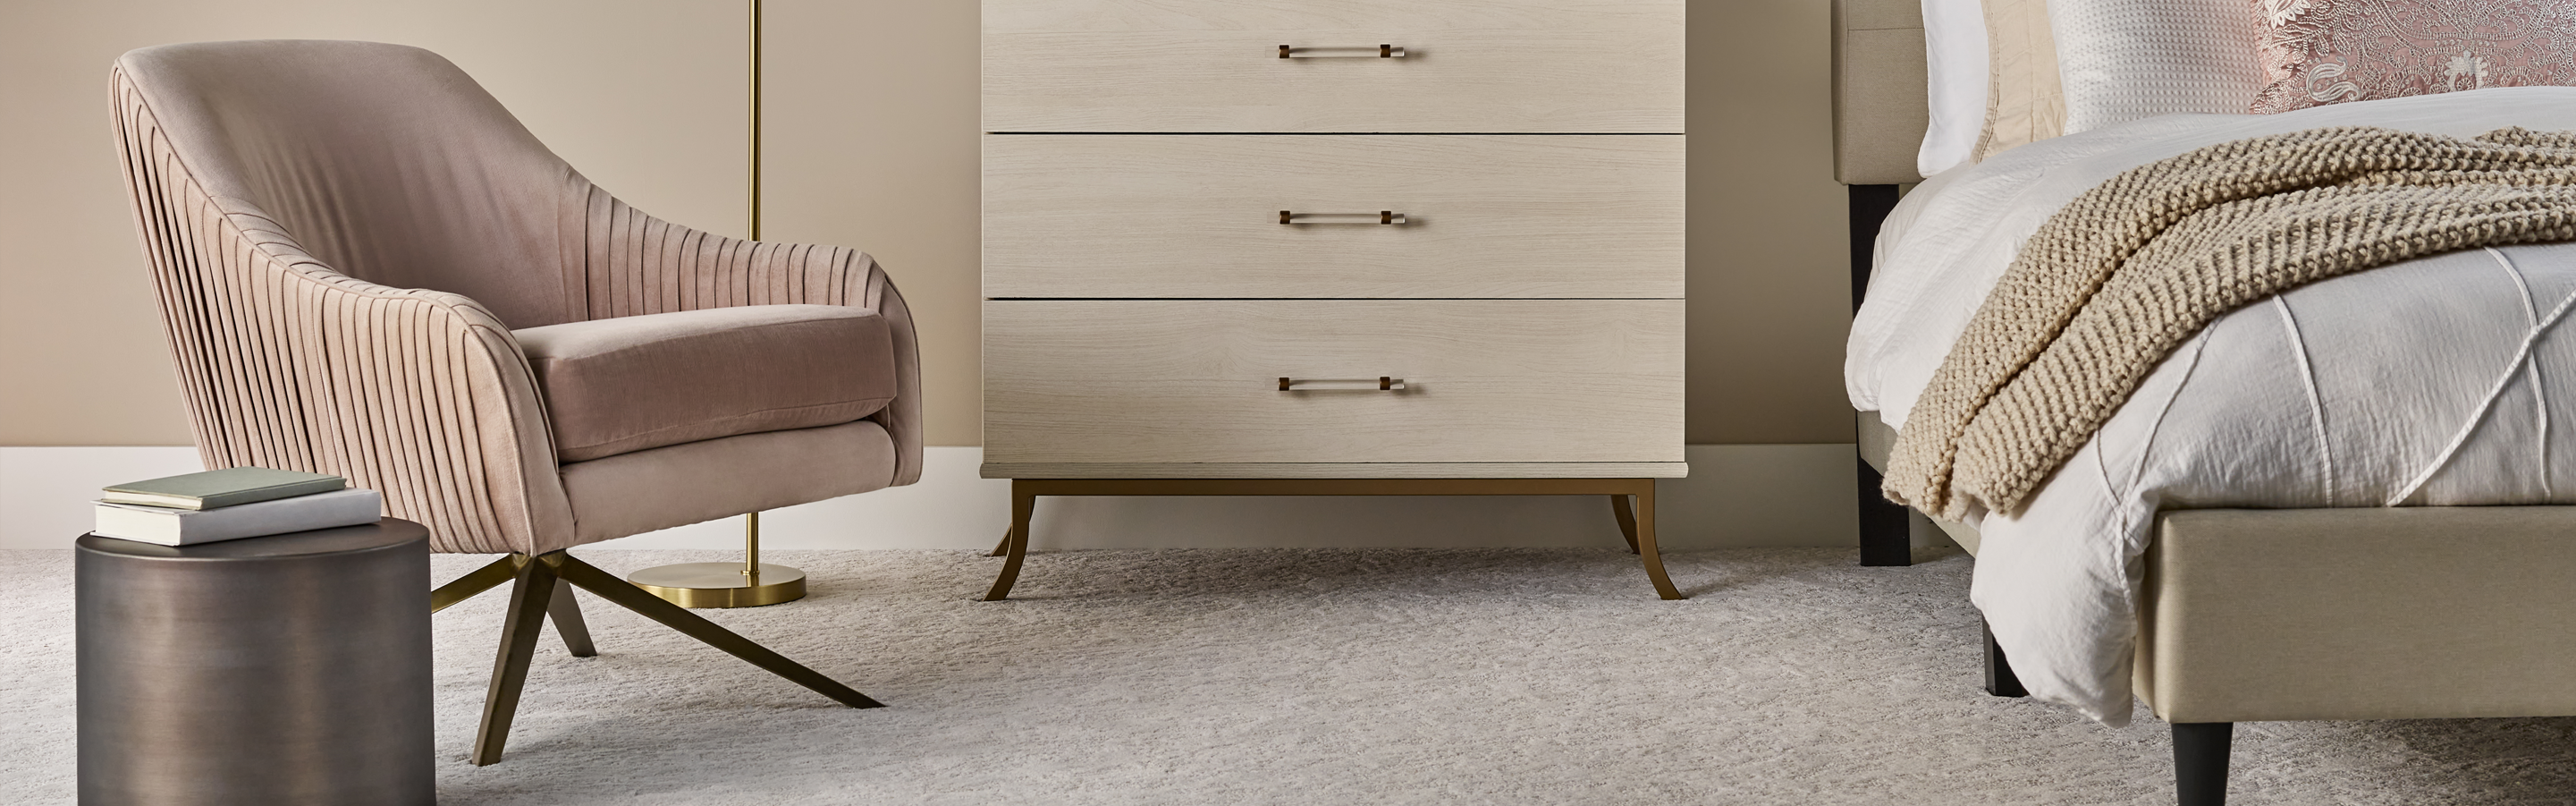 Pale beige bedroom carpet with tan walls and chair 